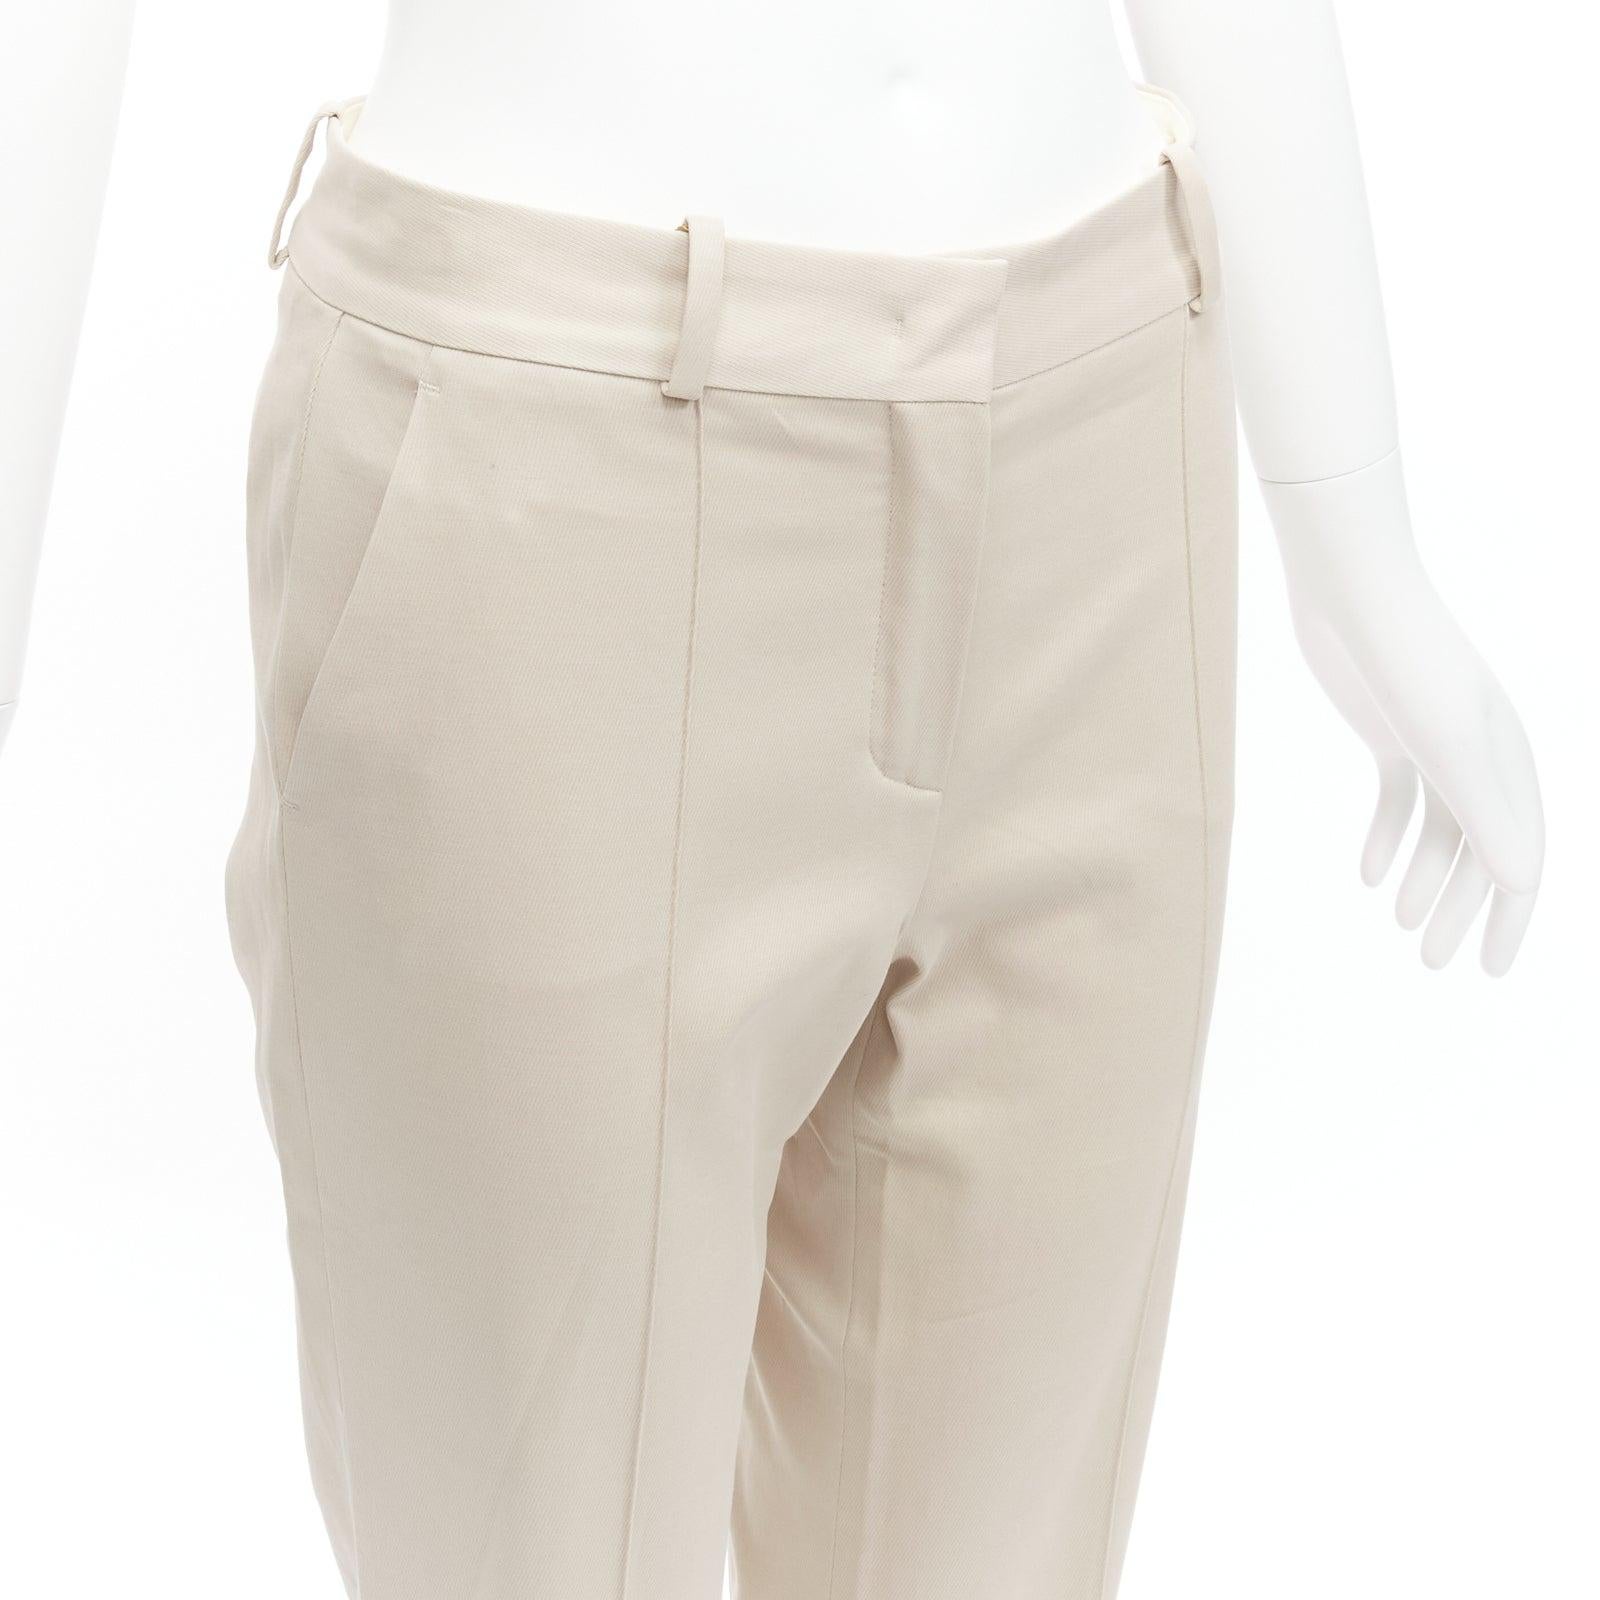 new LORO PIANA beige cotton blend mid waist classic tapered cropped pants IT38 XS
Reference: SNKO/A00333
Brand: Loro Piana
Material: Cotton, Blend
Color: Beige
Pattern: Solid
Closure: Zip Fly
Made in: Italy

CONDITION:
Condition: New with